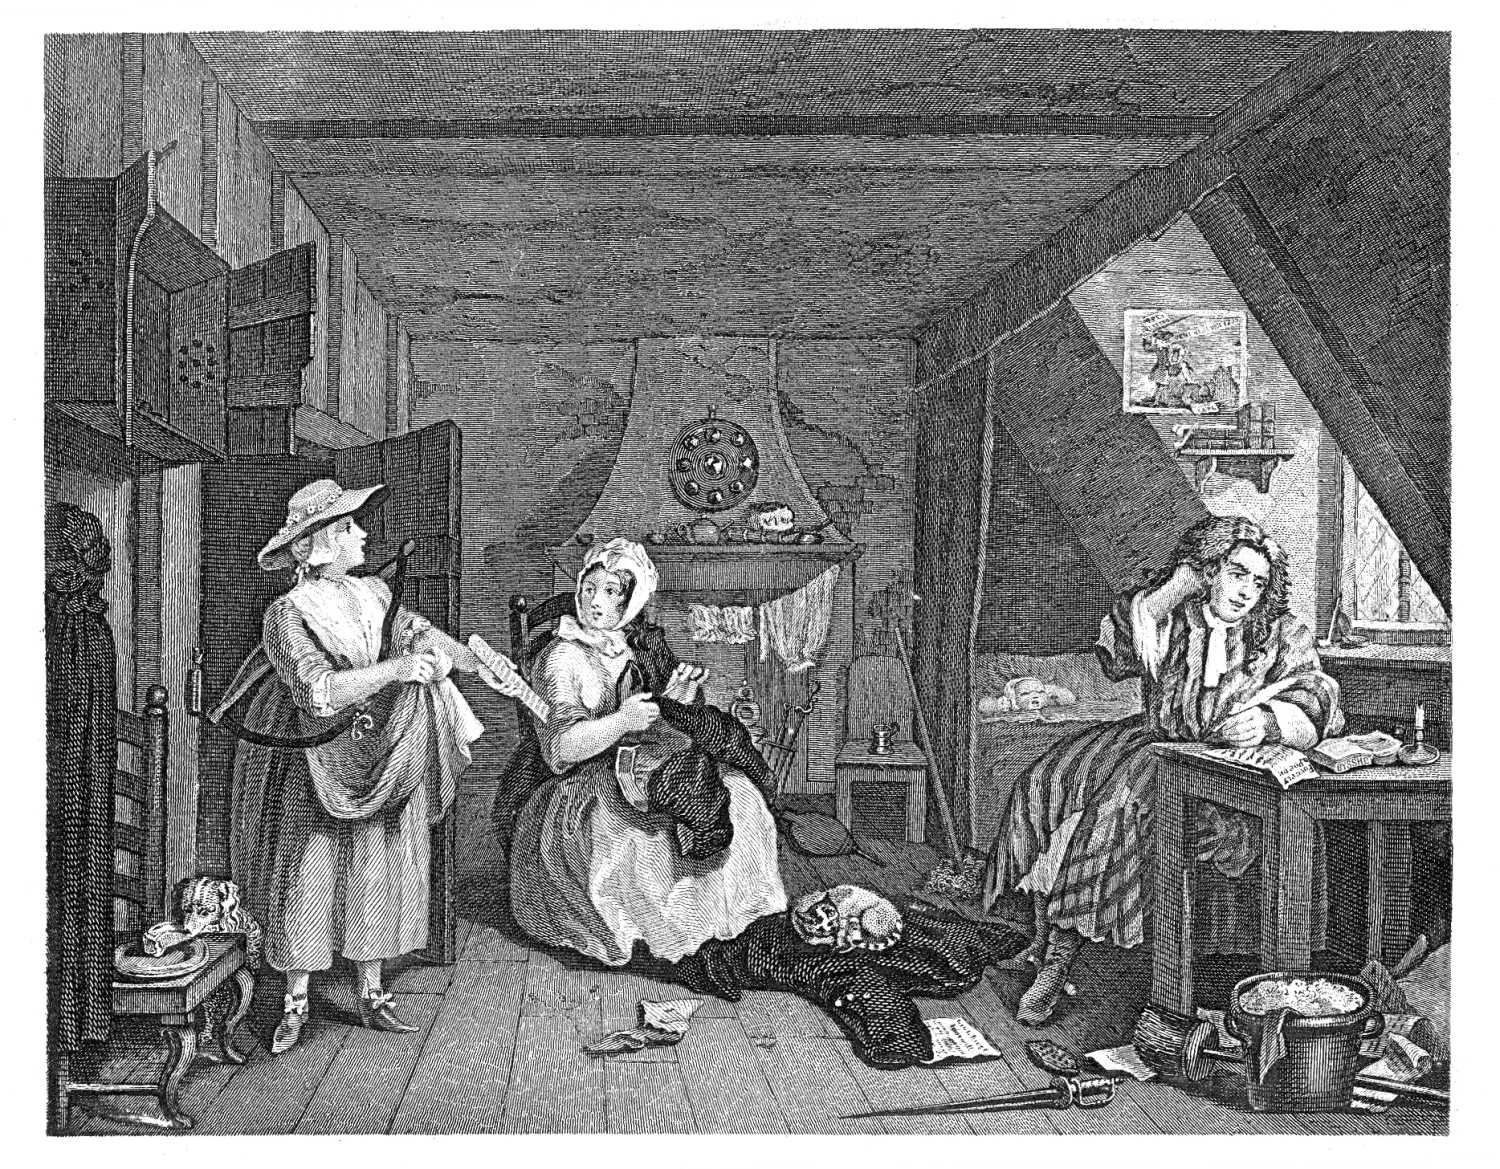 The Project Gutenberg eBook of The Works of William Hogarth, by The Rev.  John Trusler.